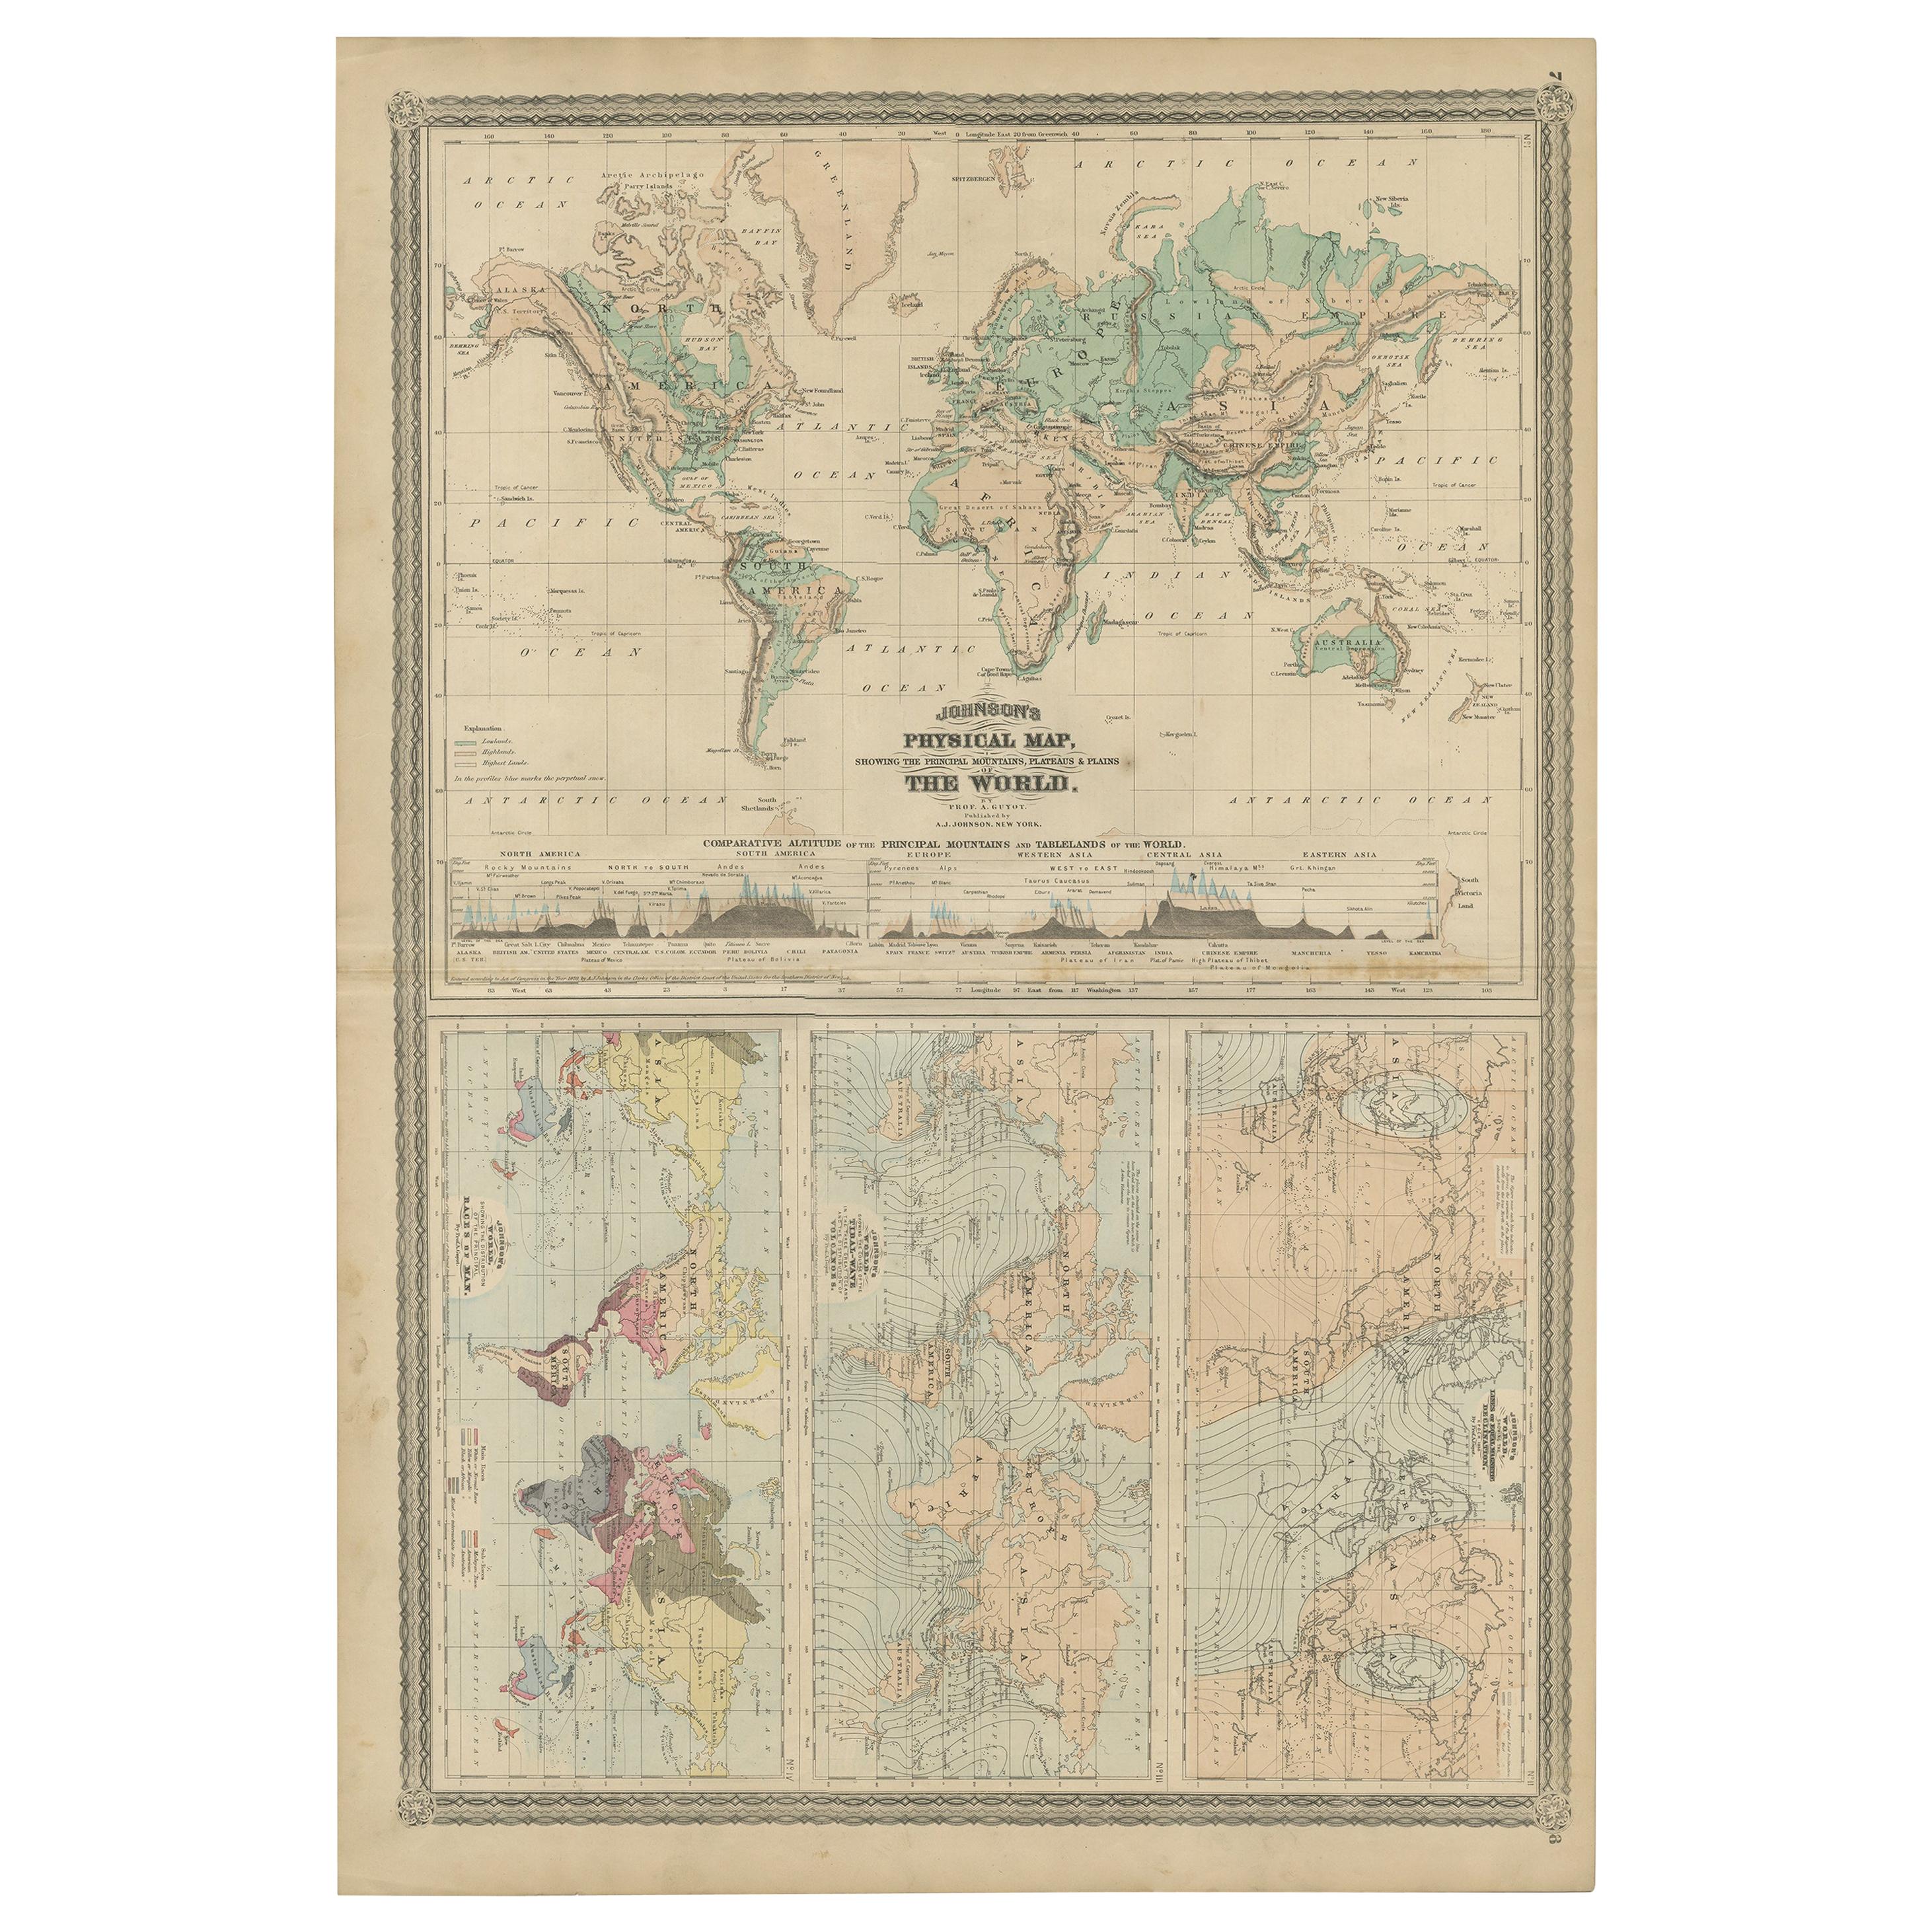 Four Physical Maps of the World on One Sheet , 1872